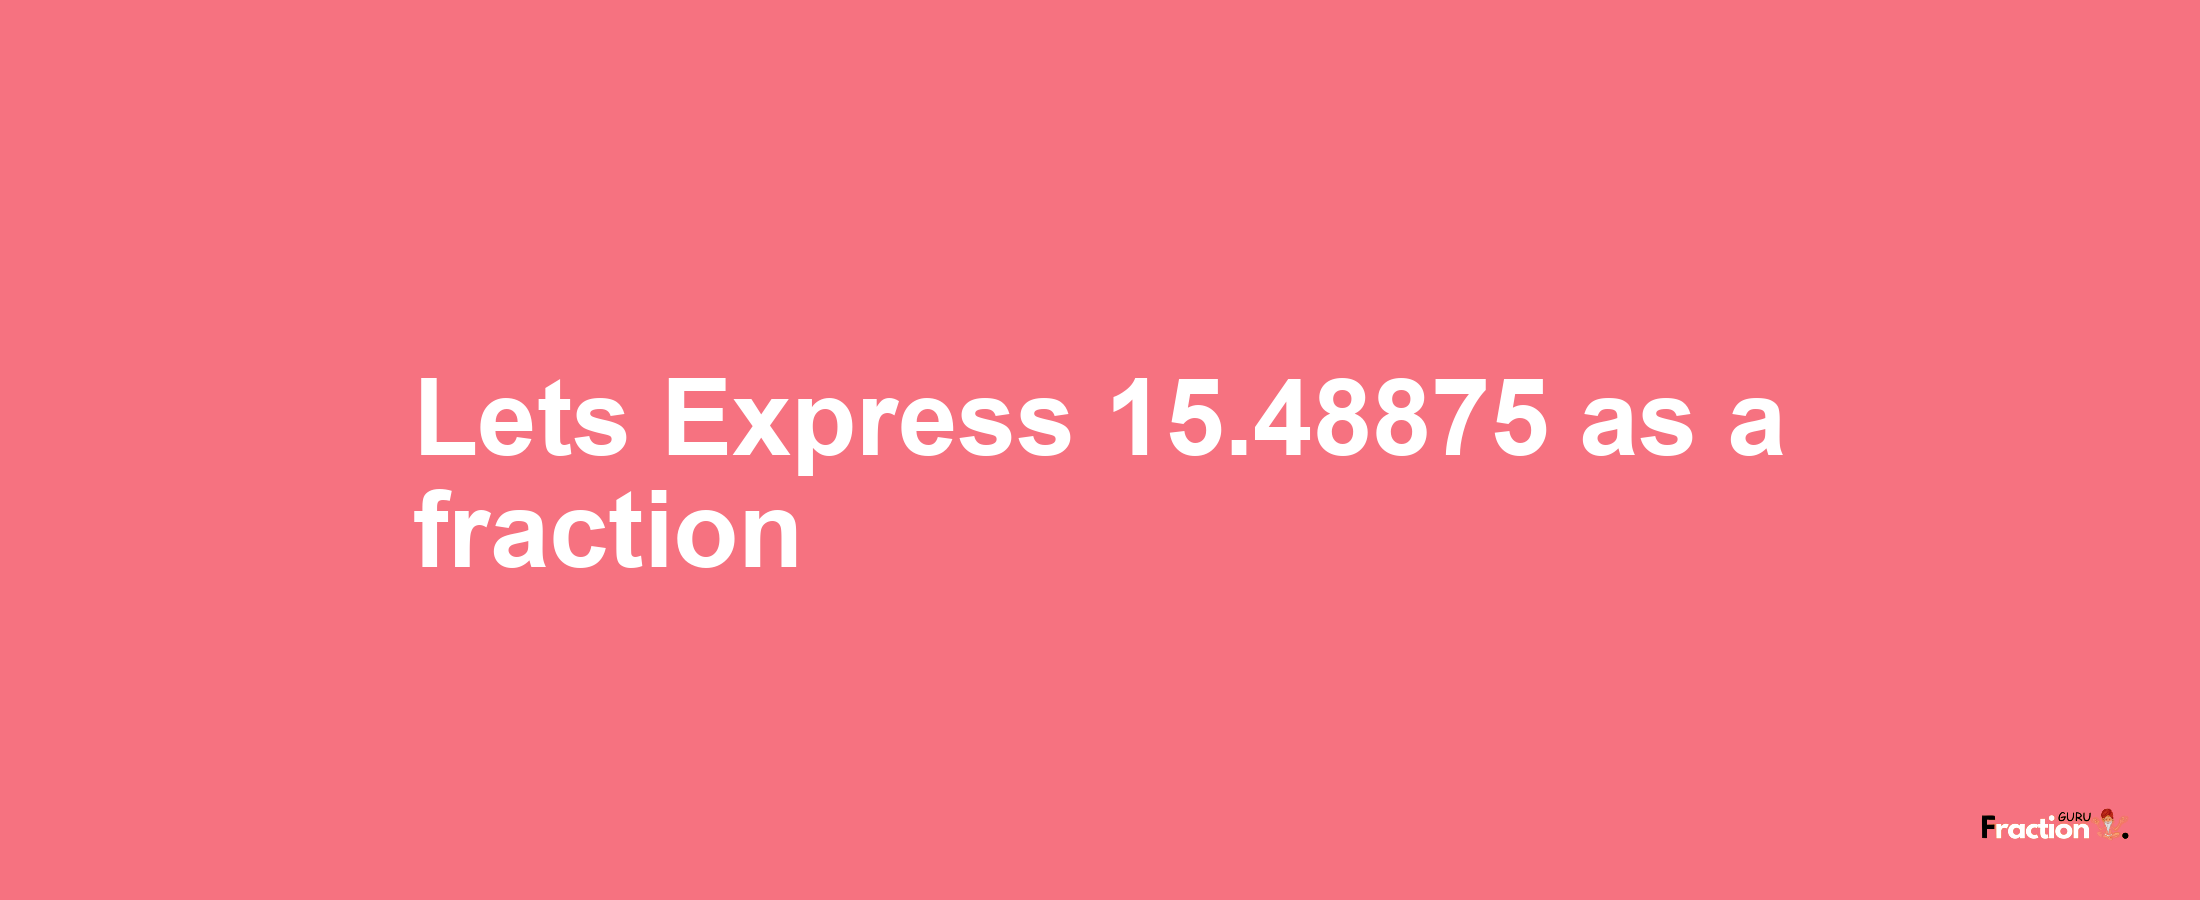 Lets Express 15.48875 as afraction